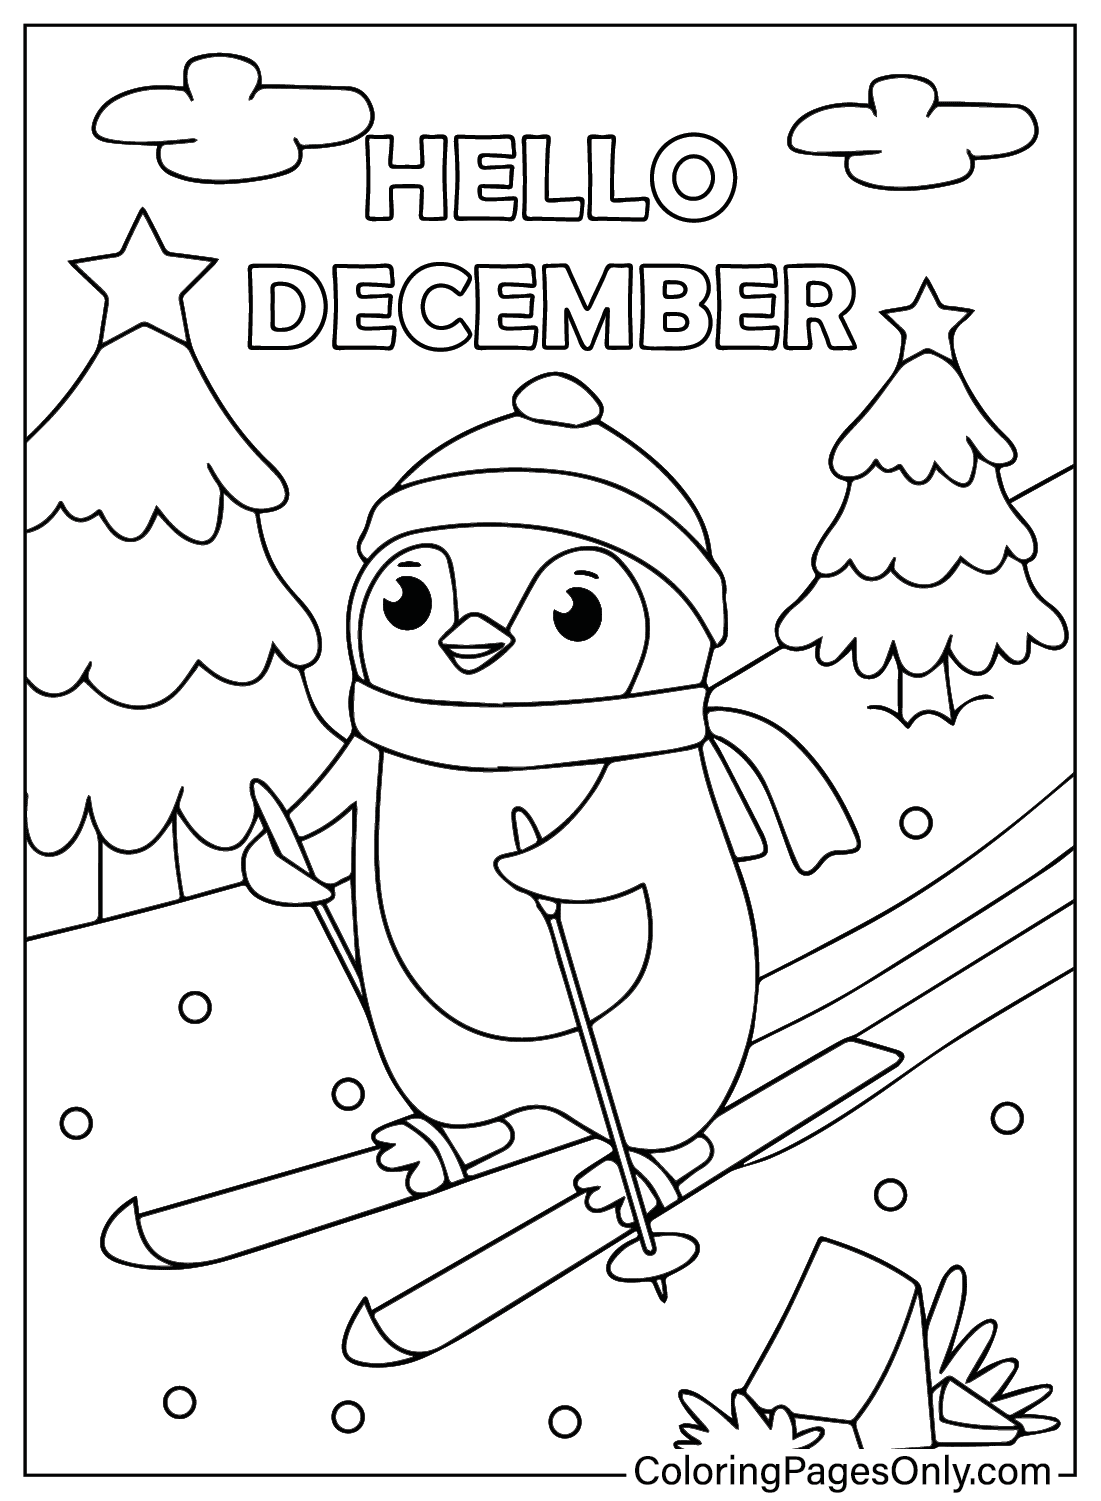 December Penguin Coloring Page from Animals